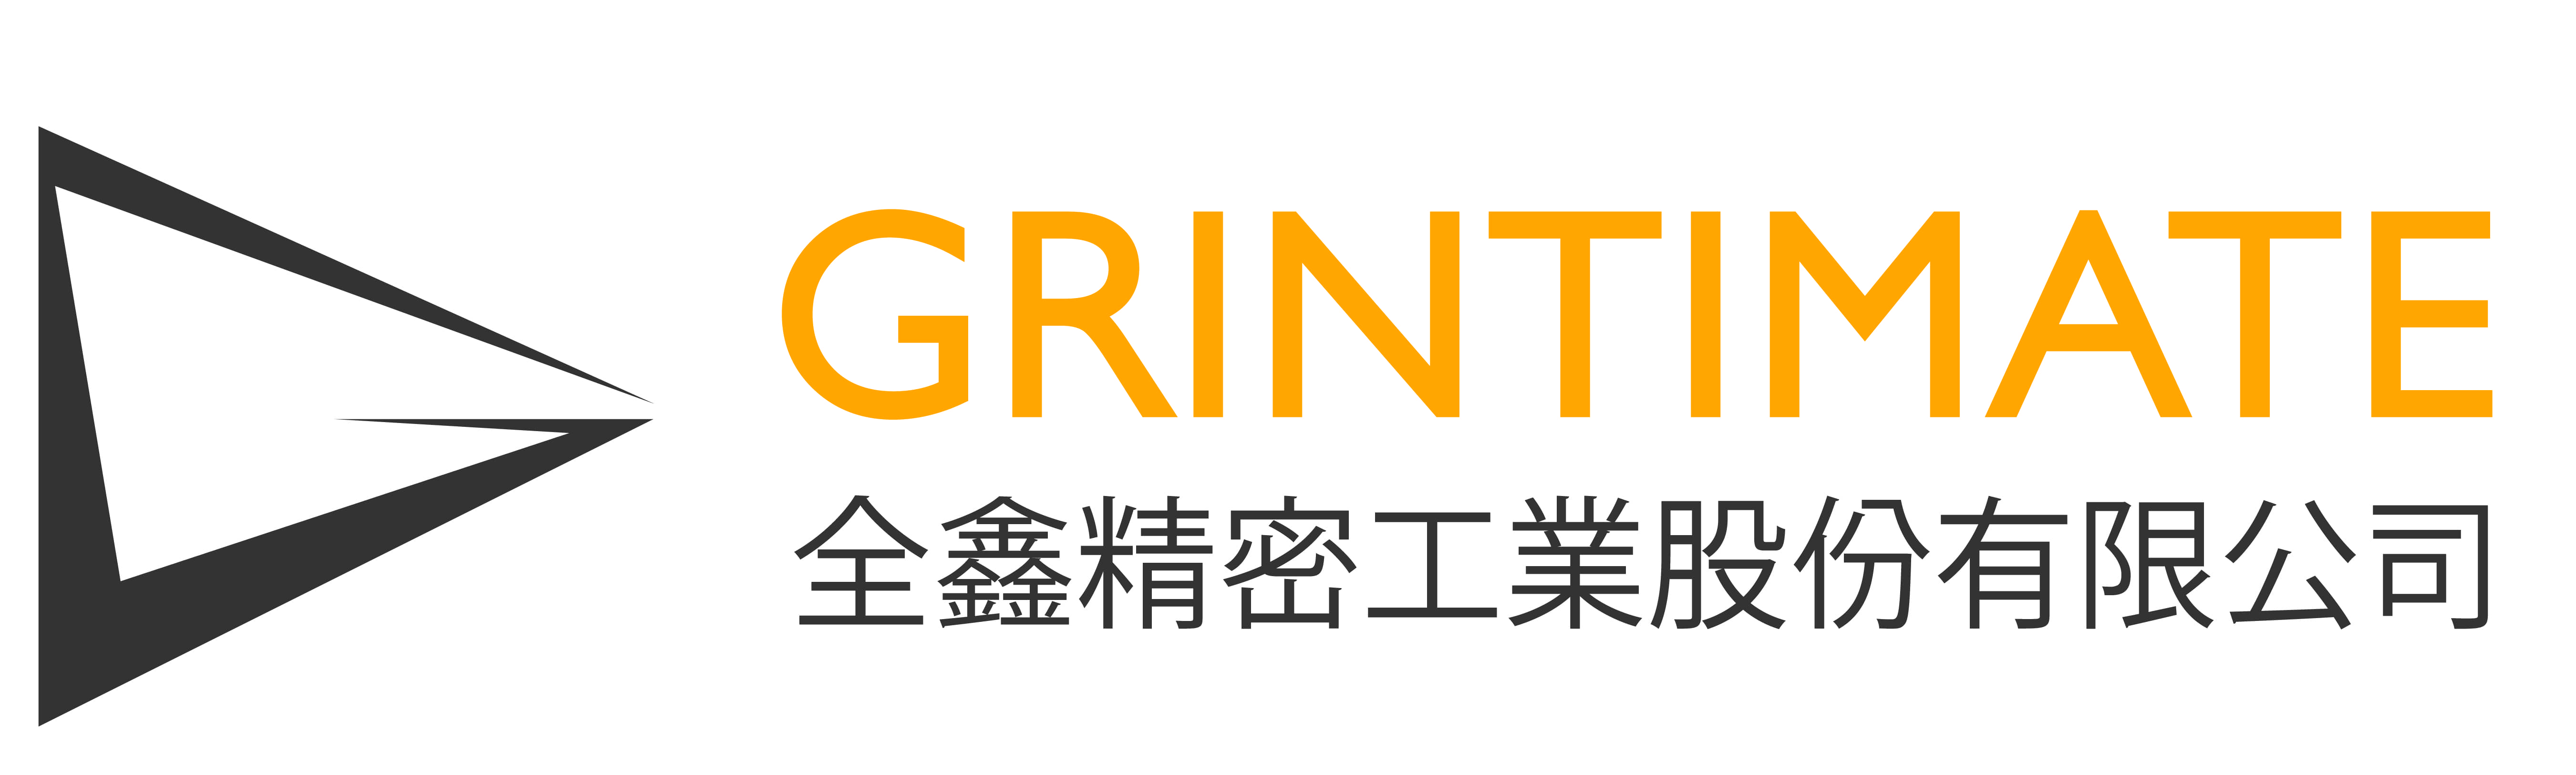 About|GRINTIMATE PRECISION INDUSTRY CO., LTD.